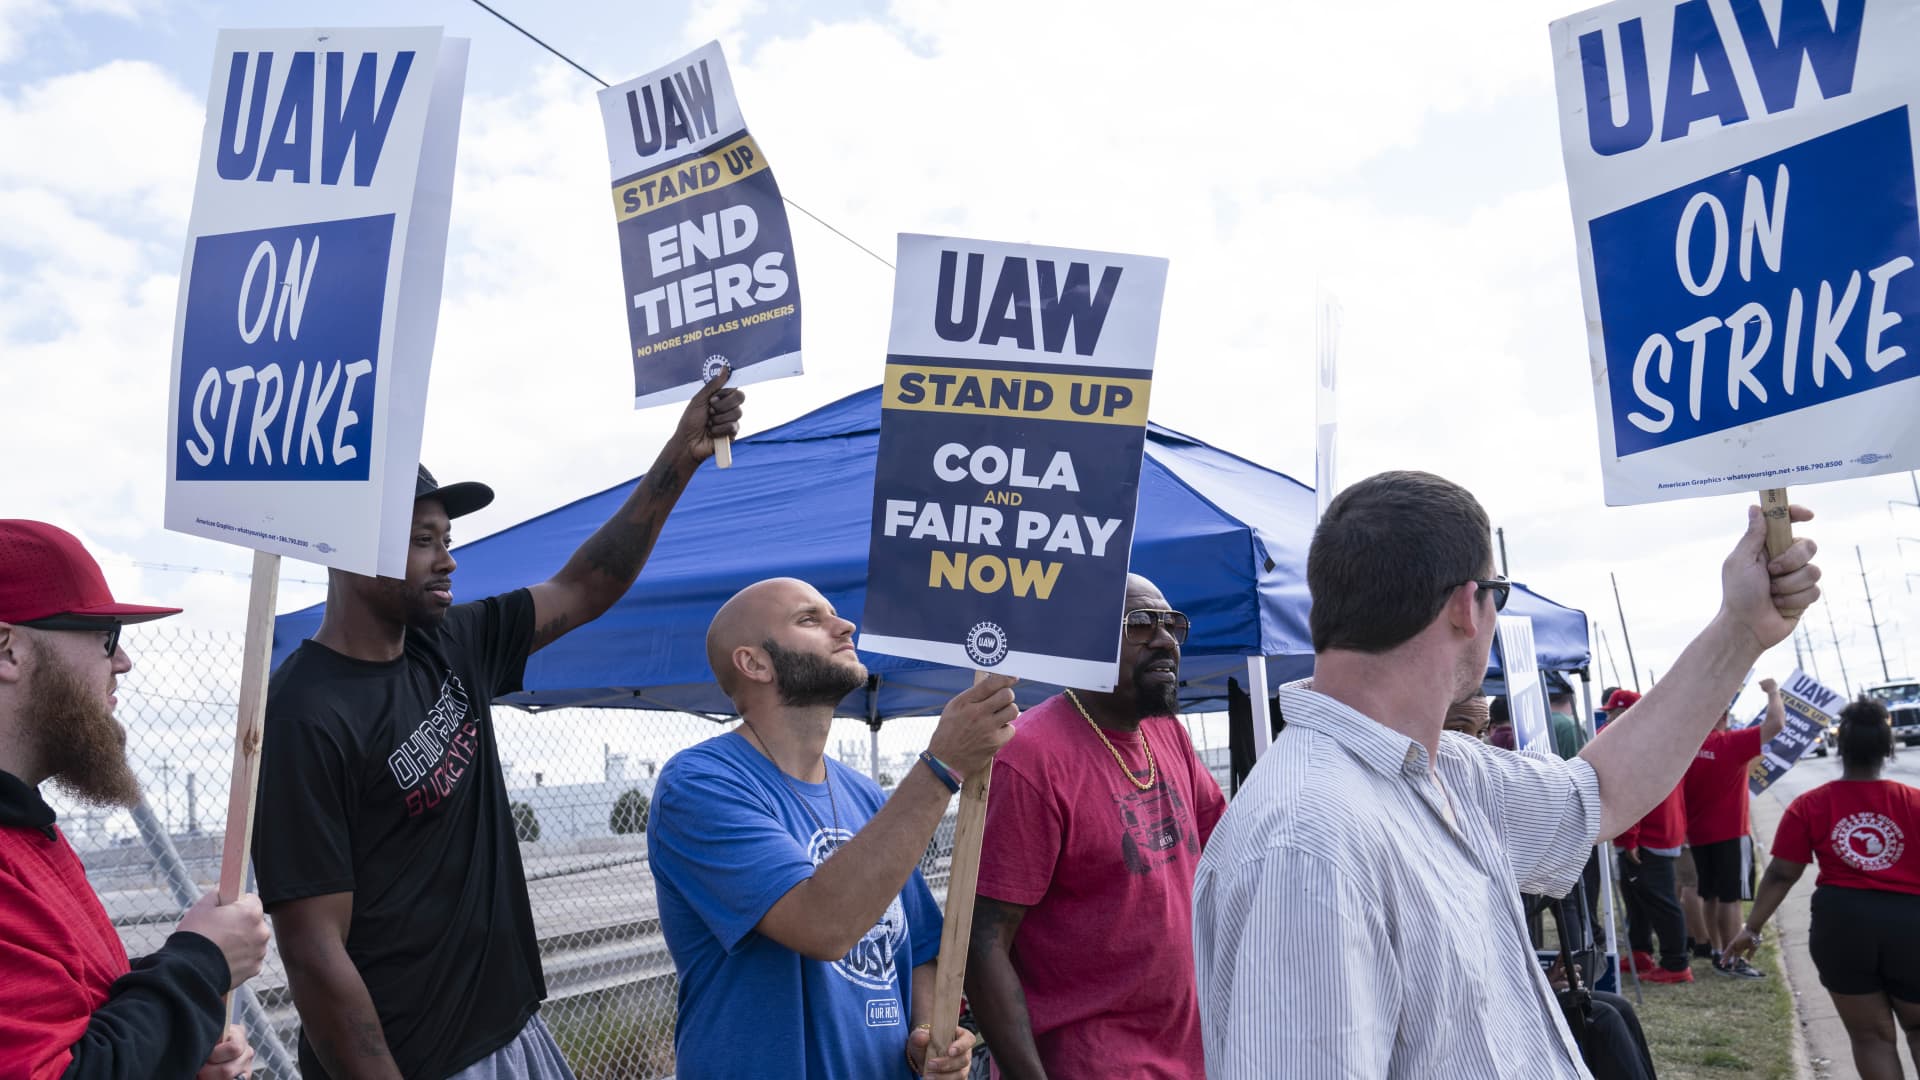 Where key issues stand as UAW closes in on extended strikes against GM, Ford and Stellantis Auto Recent